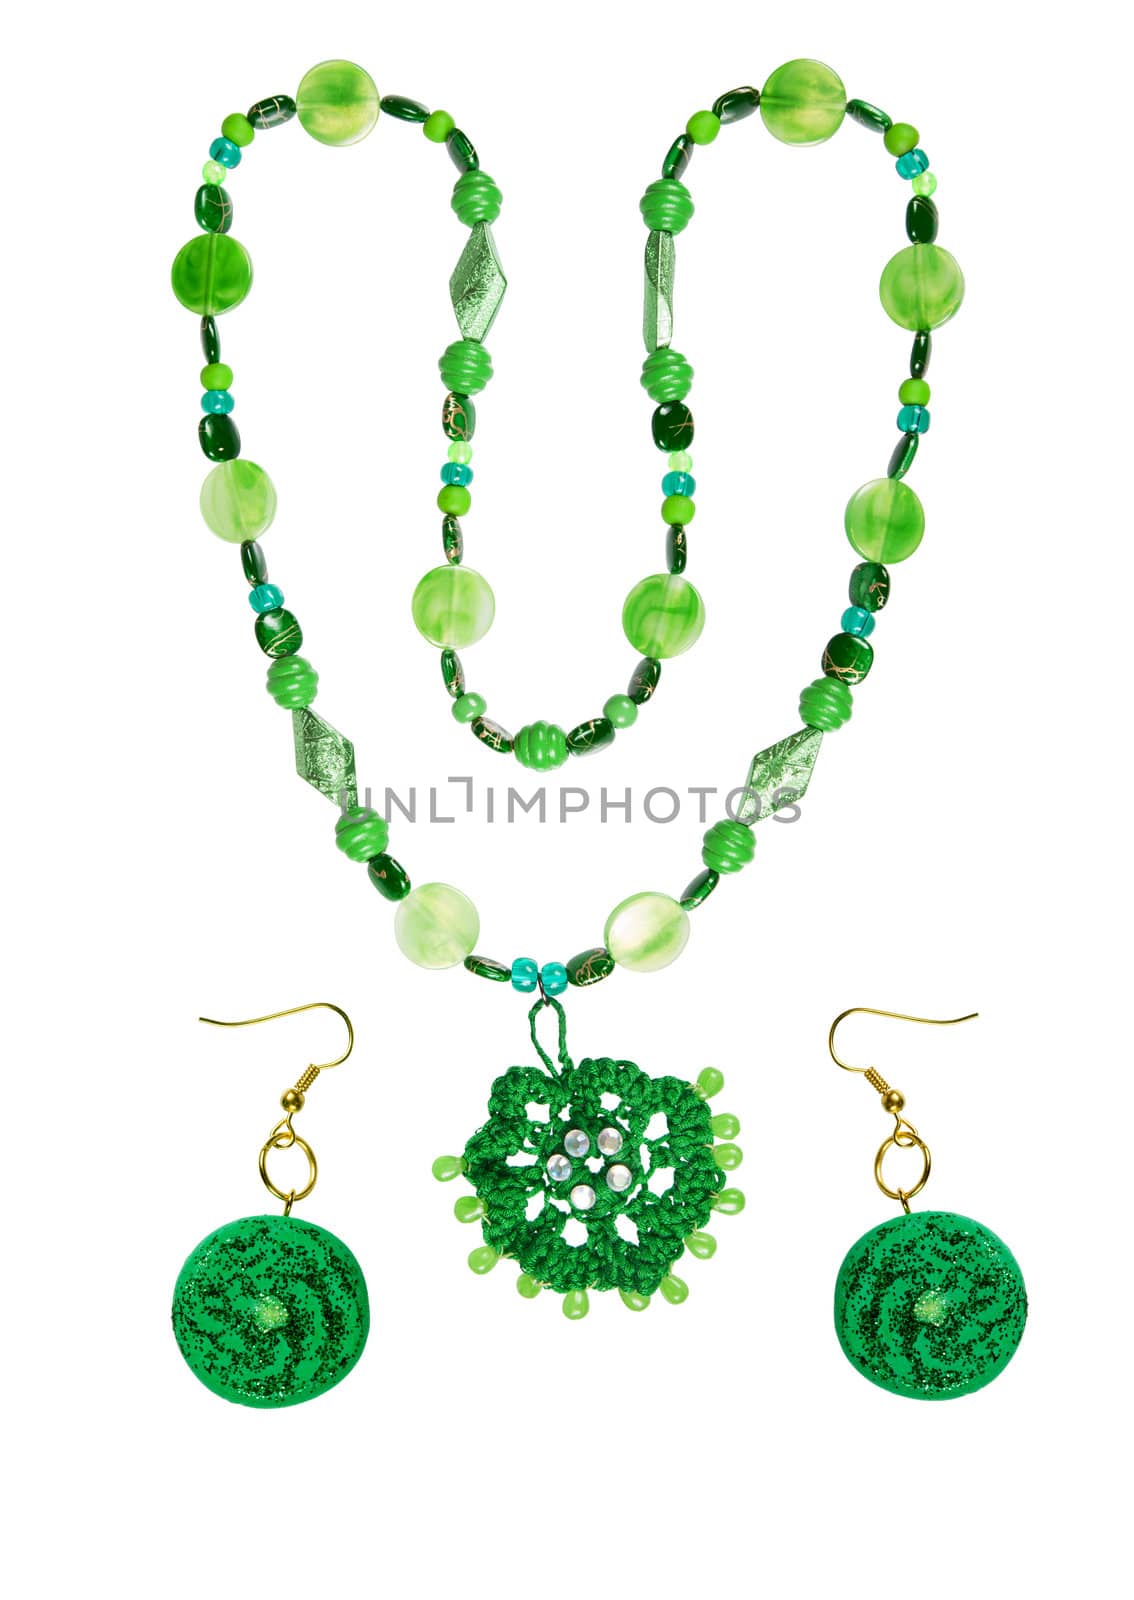 beads and earrings from plastic, wood, yarn glass by AleksandrN